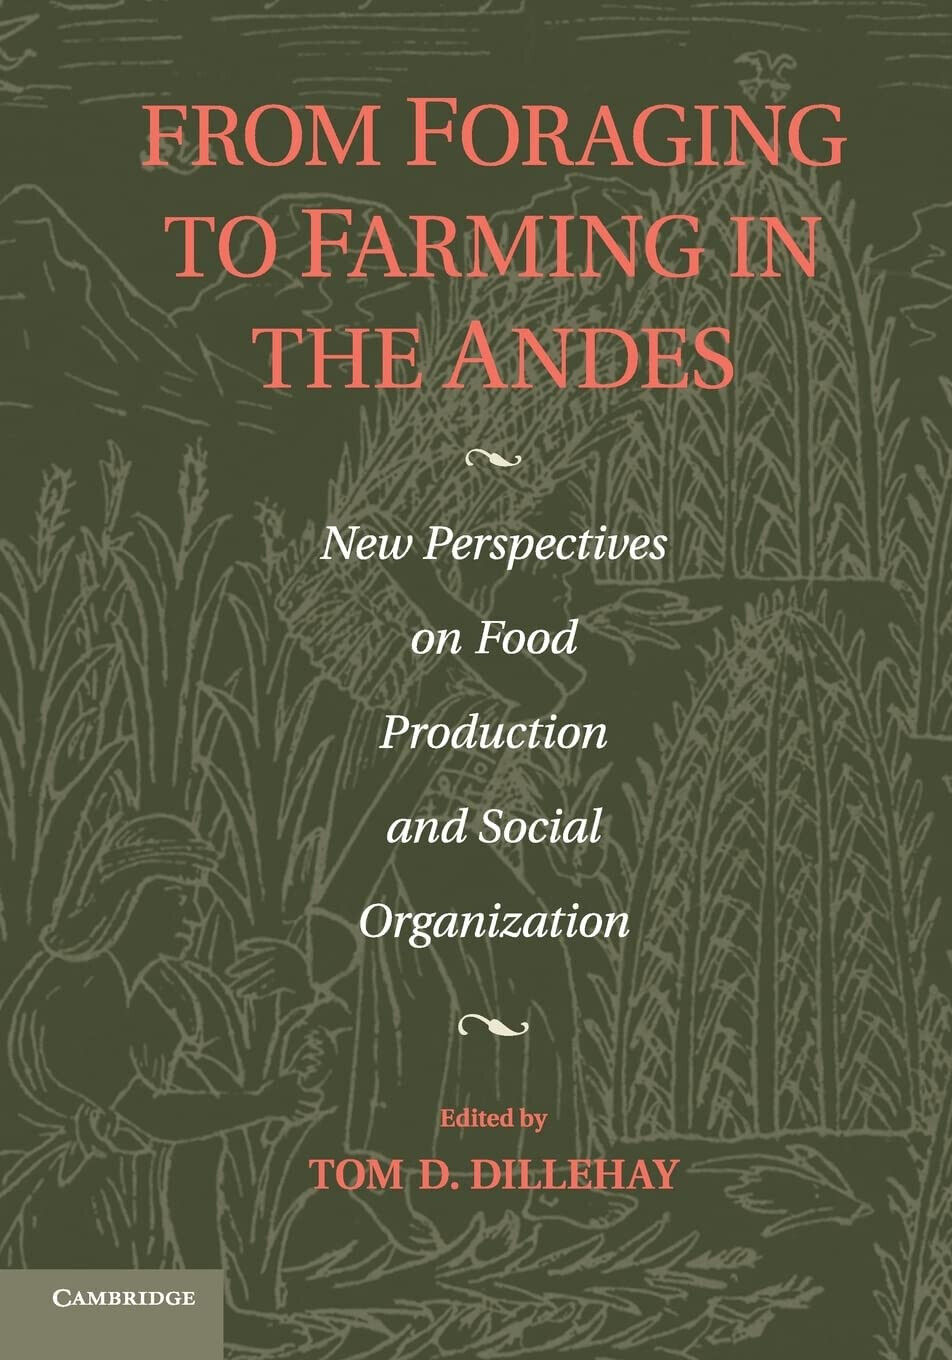 From Foraging to Farming in the Andes - Tom D. Dillehay - Cambridge, 2014 libro usato